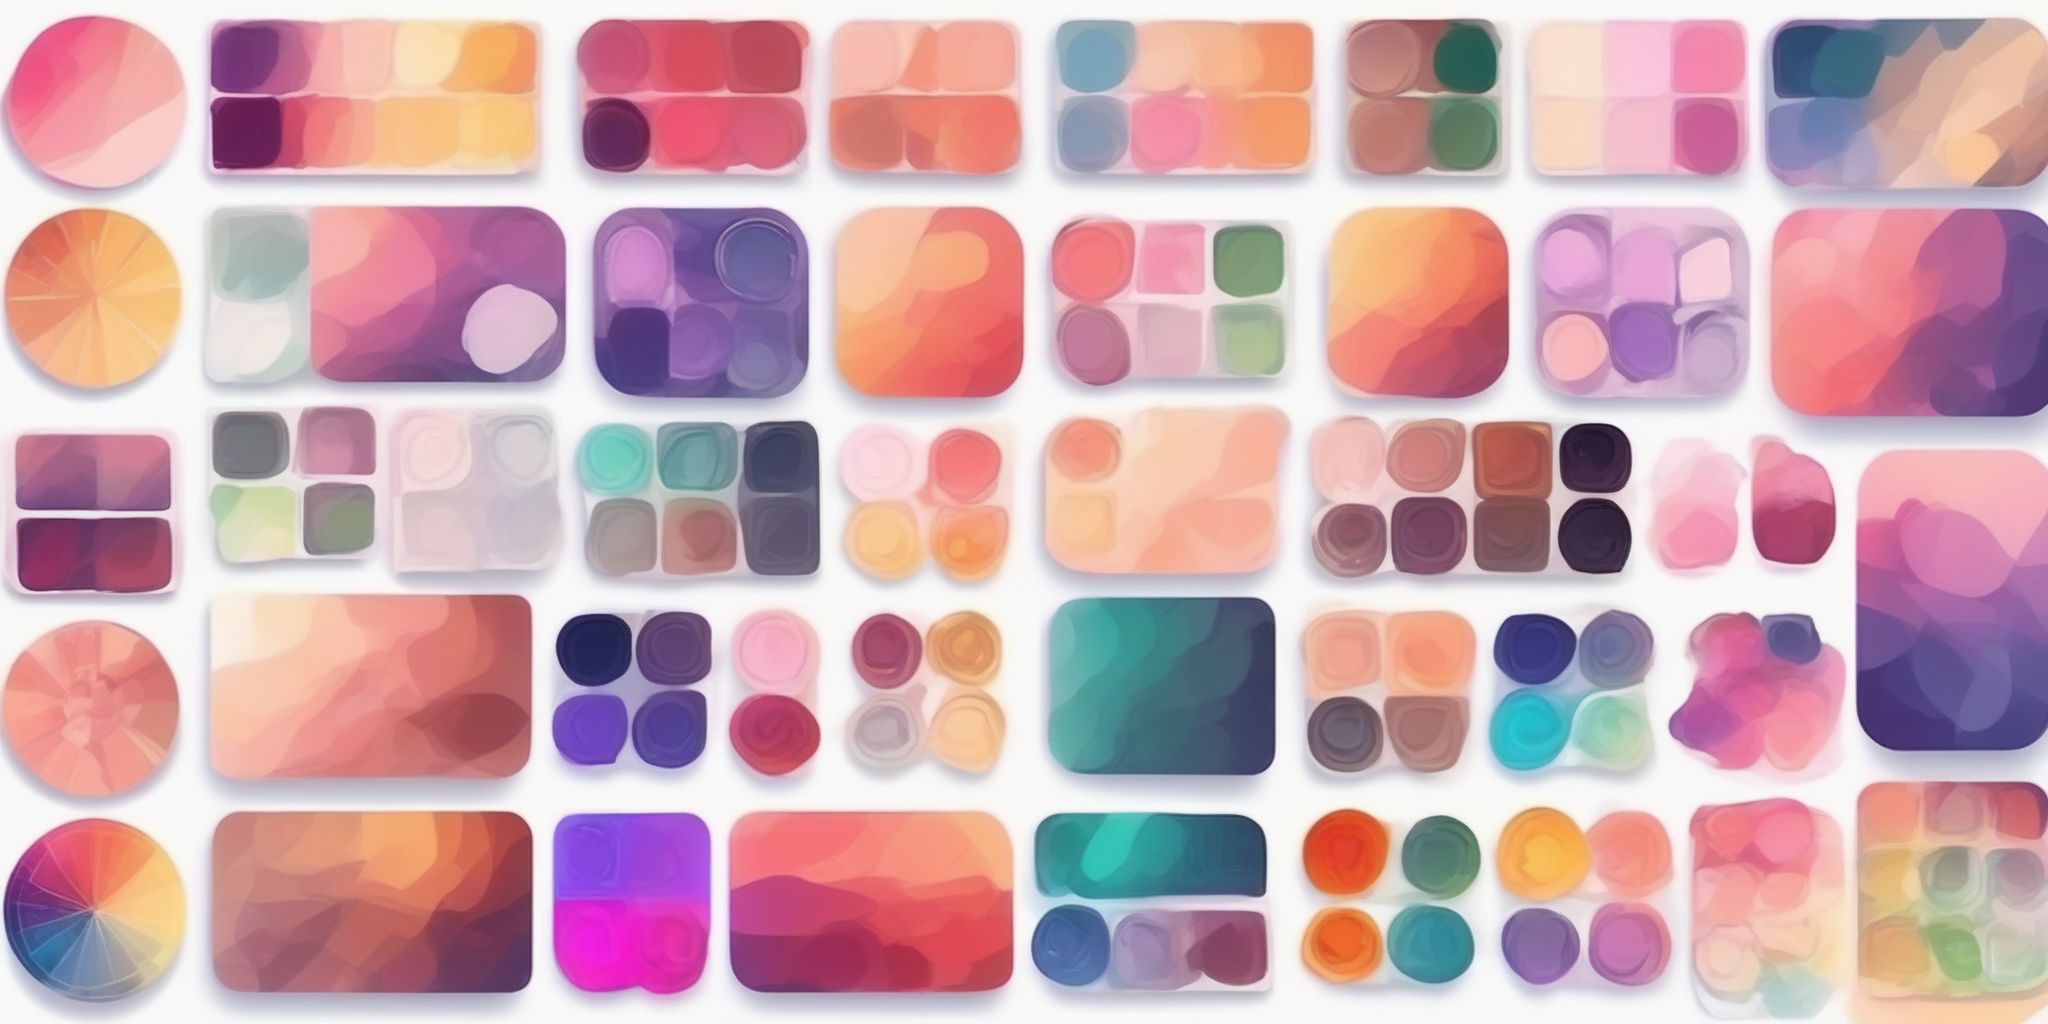 Palette in illustration style with gradients and white background